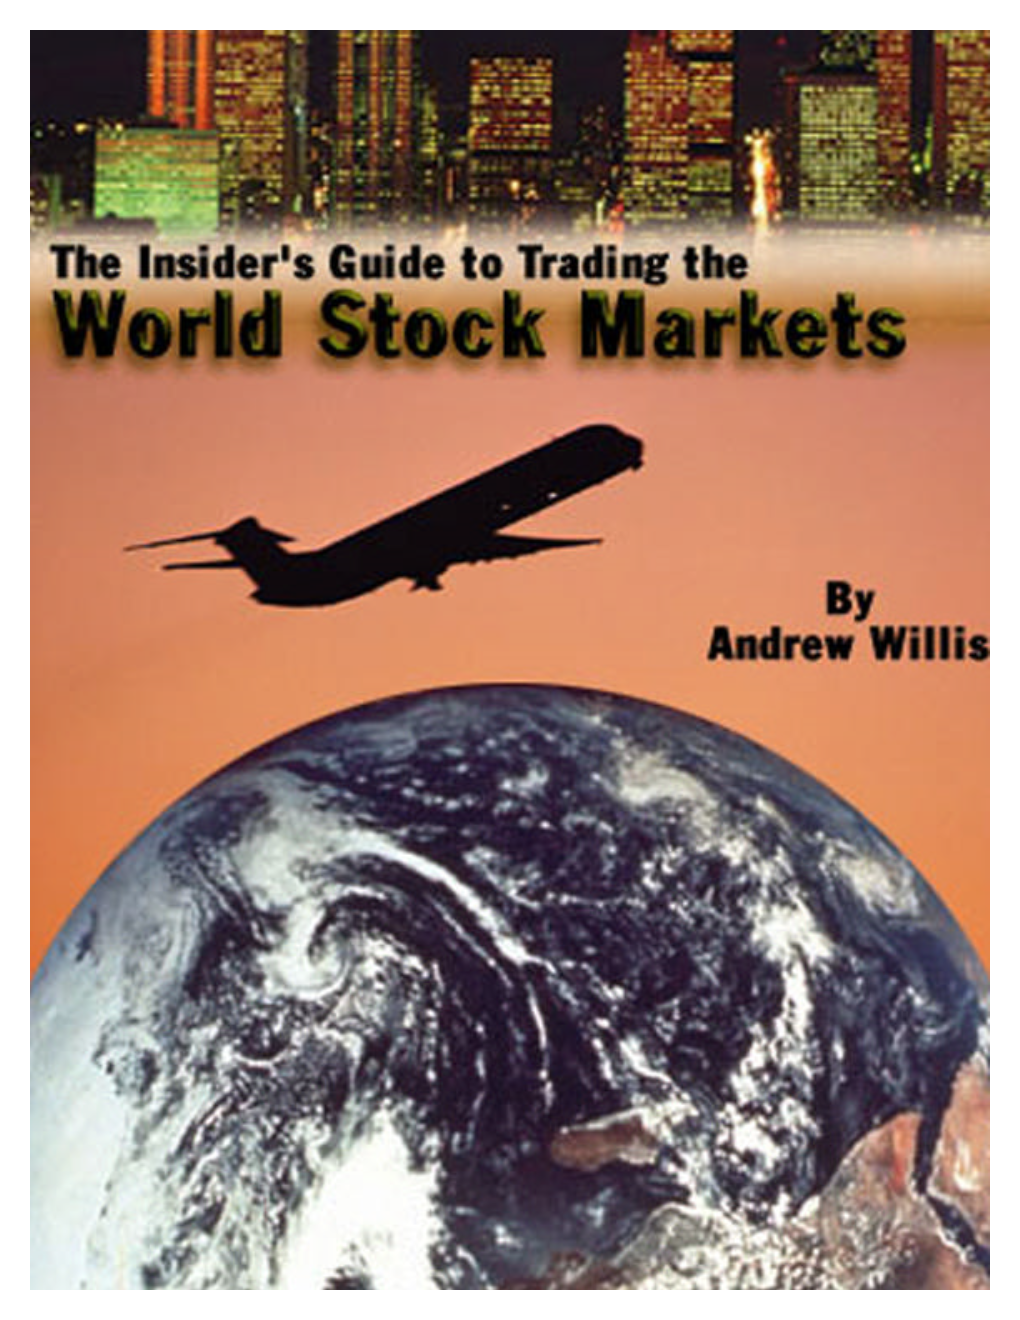 The Insider's Guide to Trading the World Stock Markets by Andrew Willis